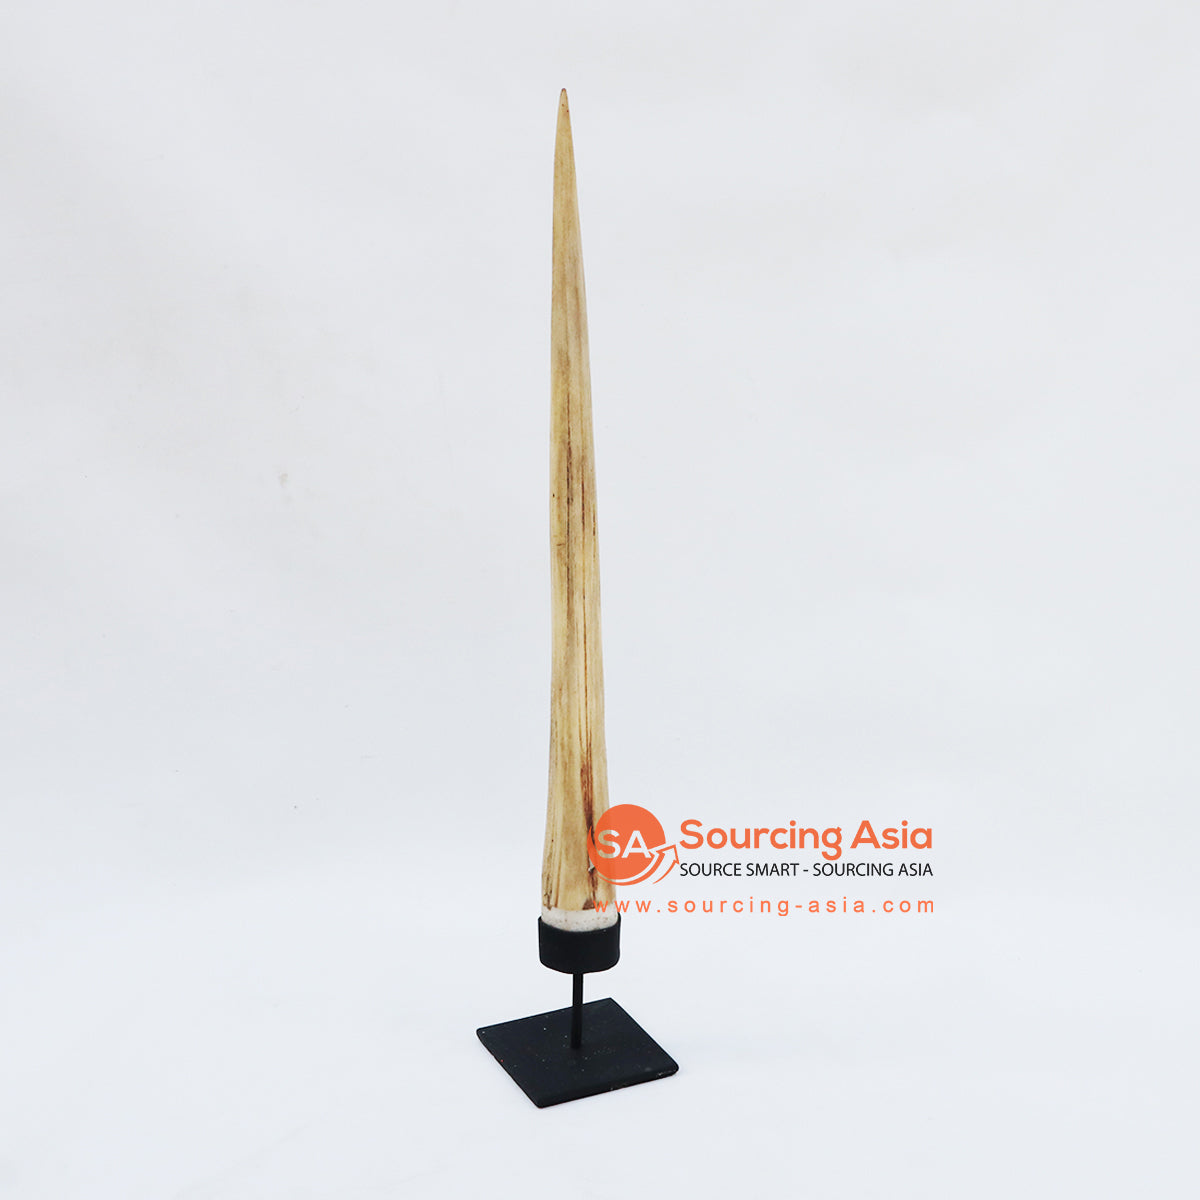 KNTC067 NATURAL MARLIN TOOTH BONE ON STAND DECORATION